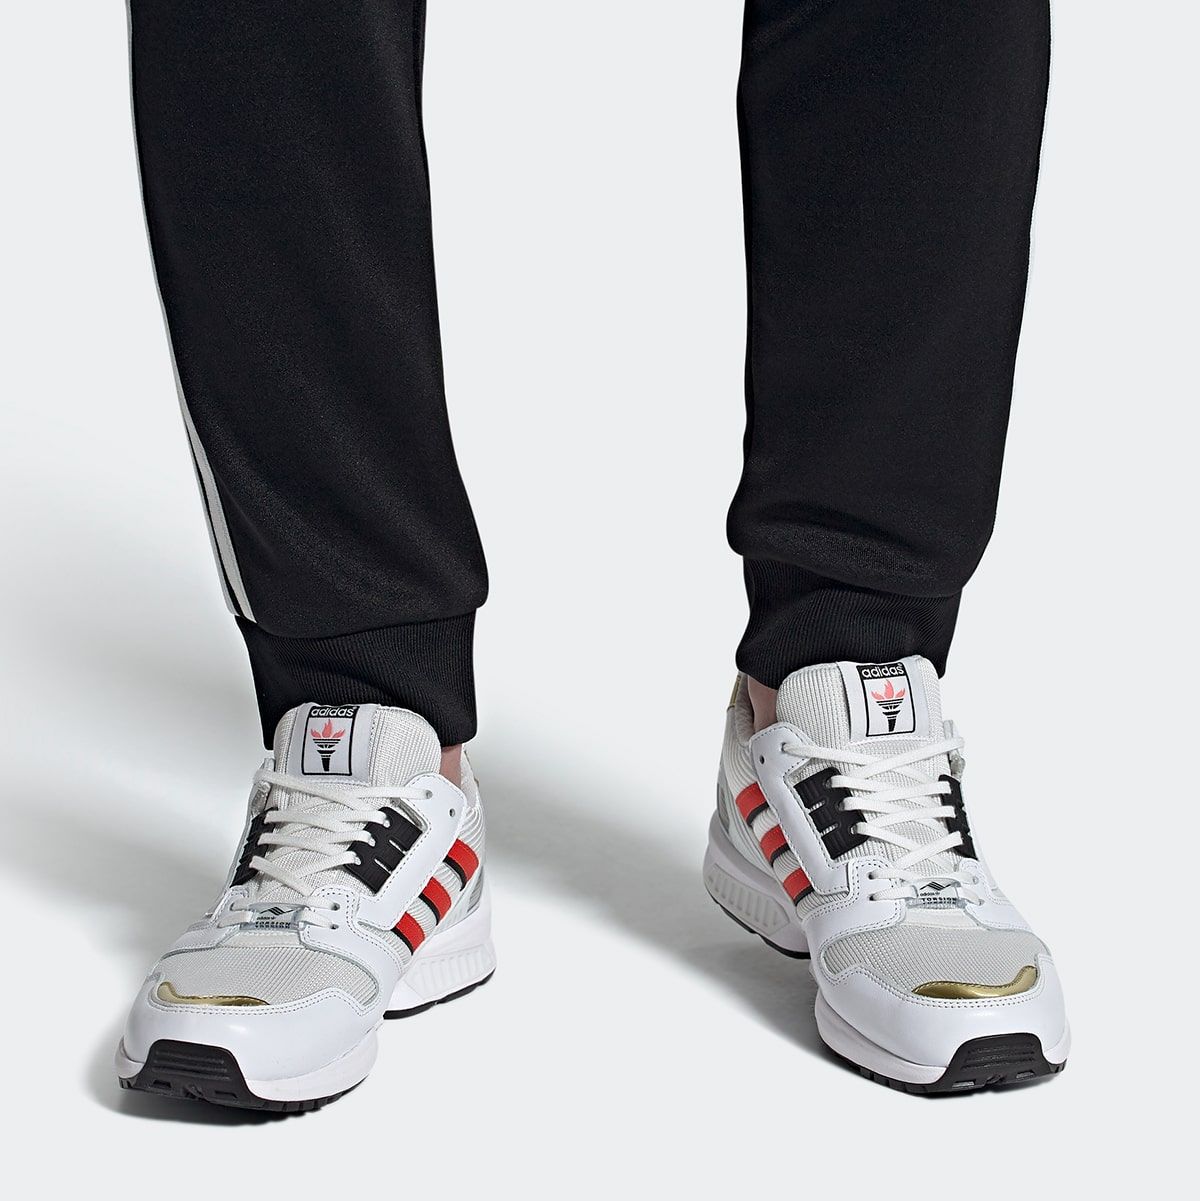 adidas ZX 8000 “Olympic” Arrives This April | House of Heat°